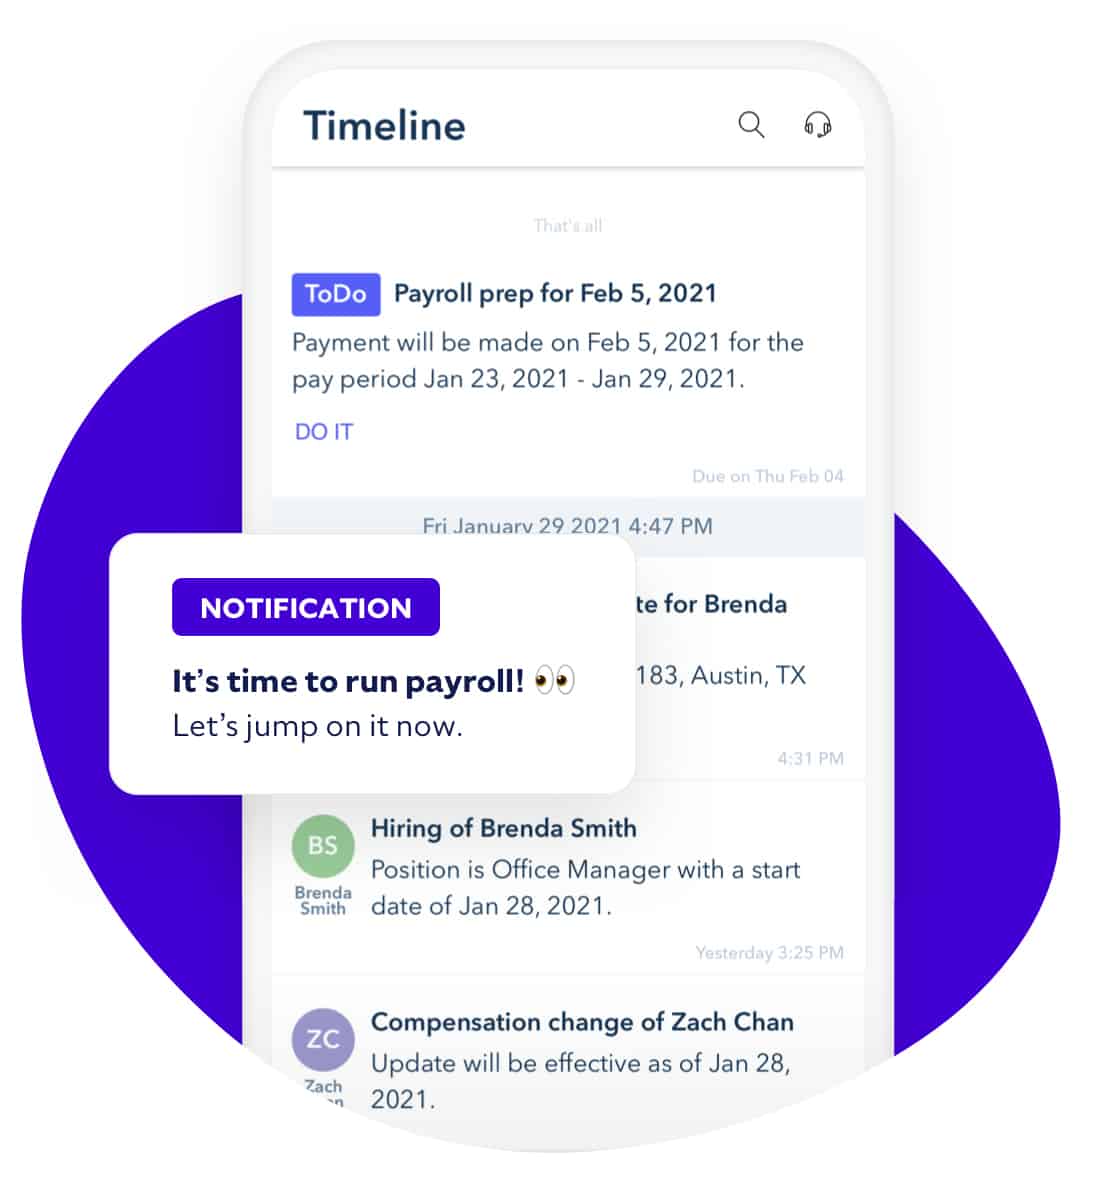 Example Timeline smart alerts and notification from Roll by ADP AI tools.